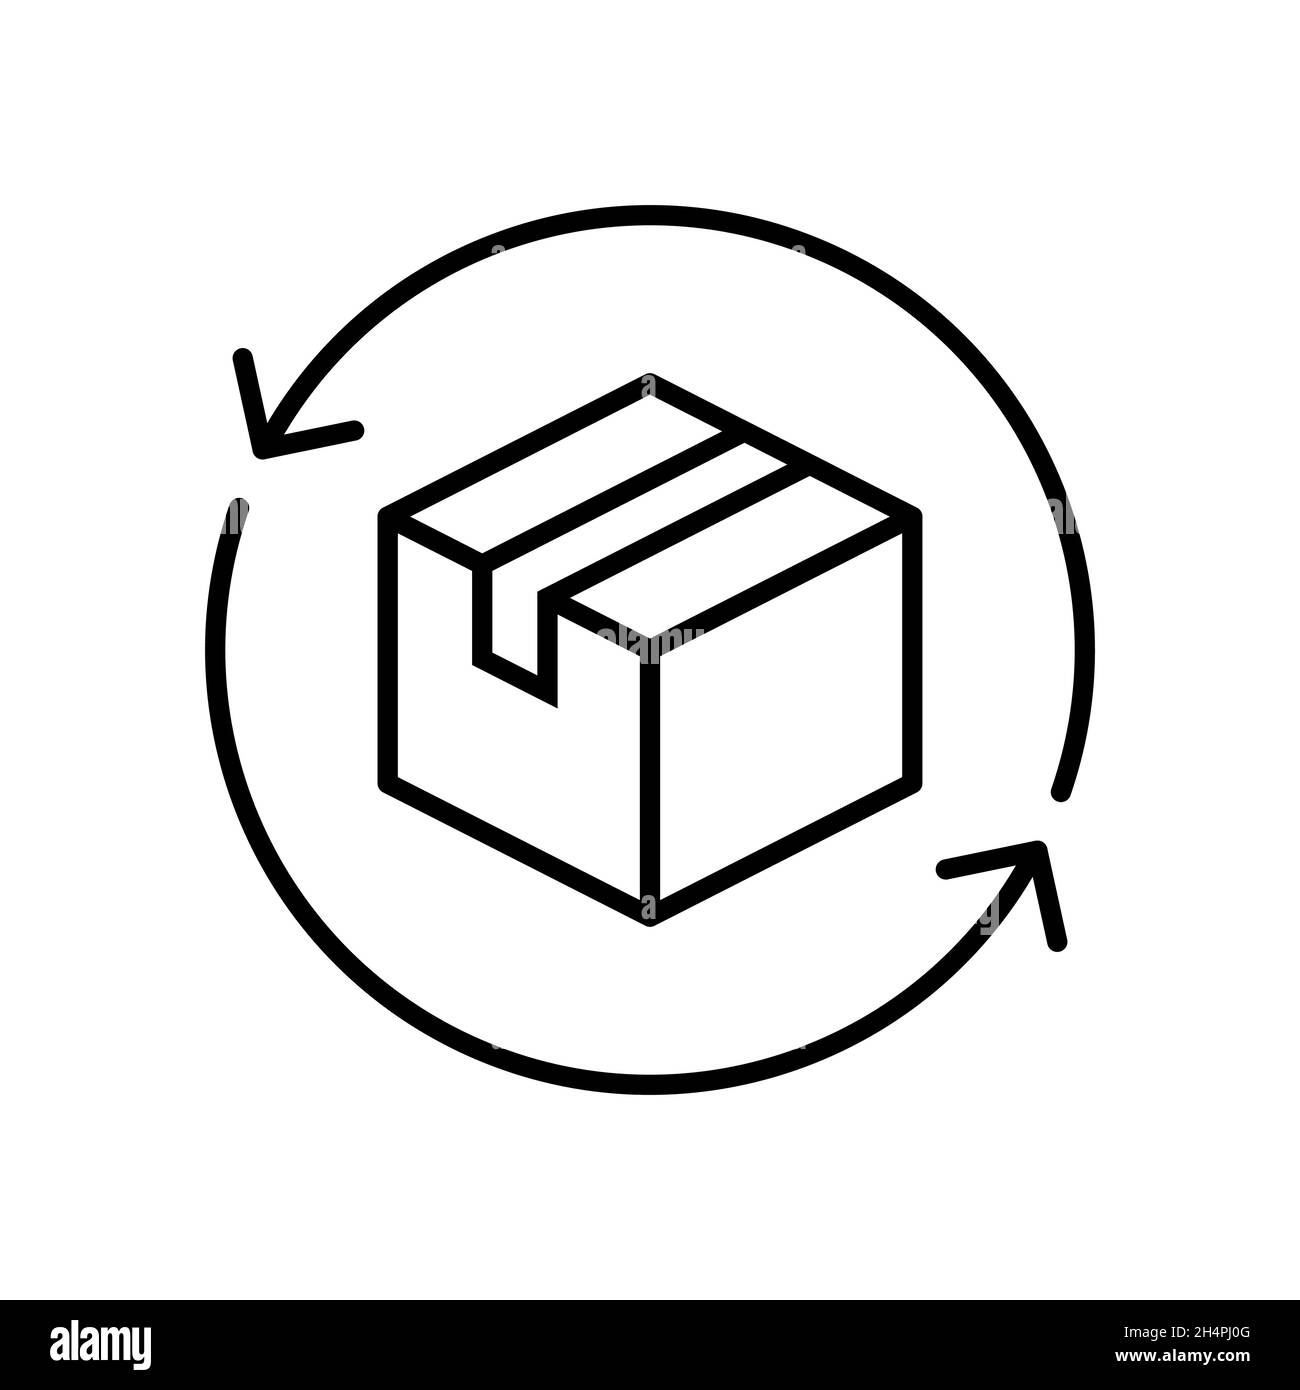 Free product return line icon. Delivery box with arrows. Exchange goods symbol. Package tracking sign. Parcel box inside circle arrow. Vector Stock Vector